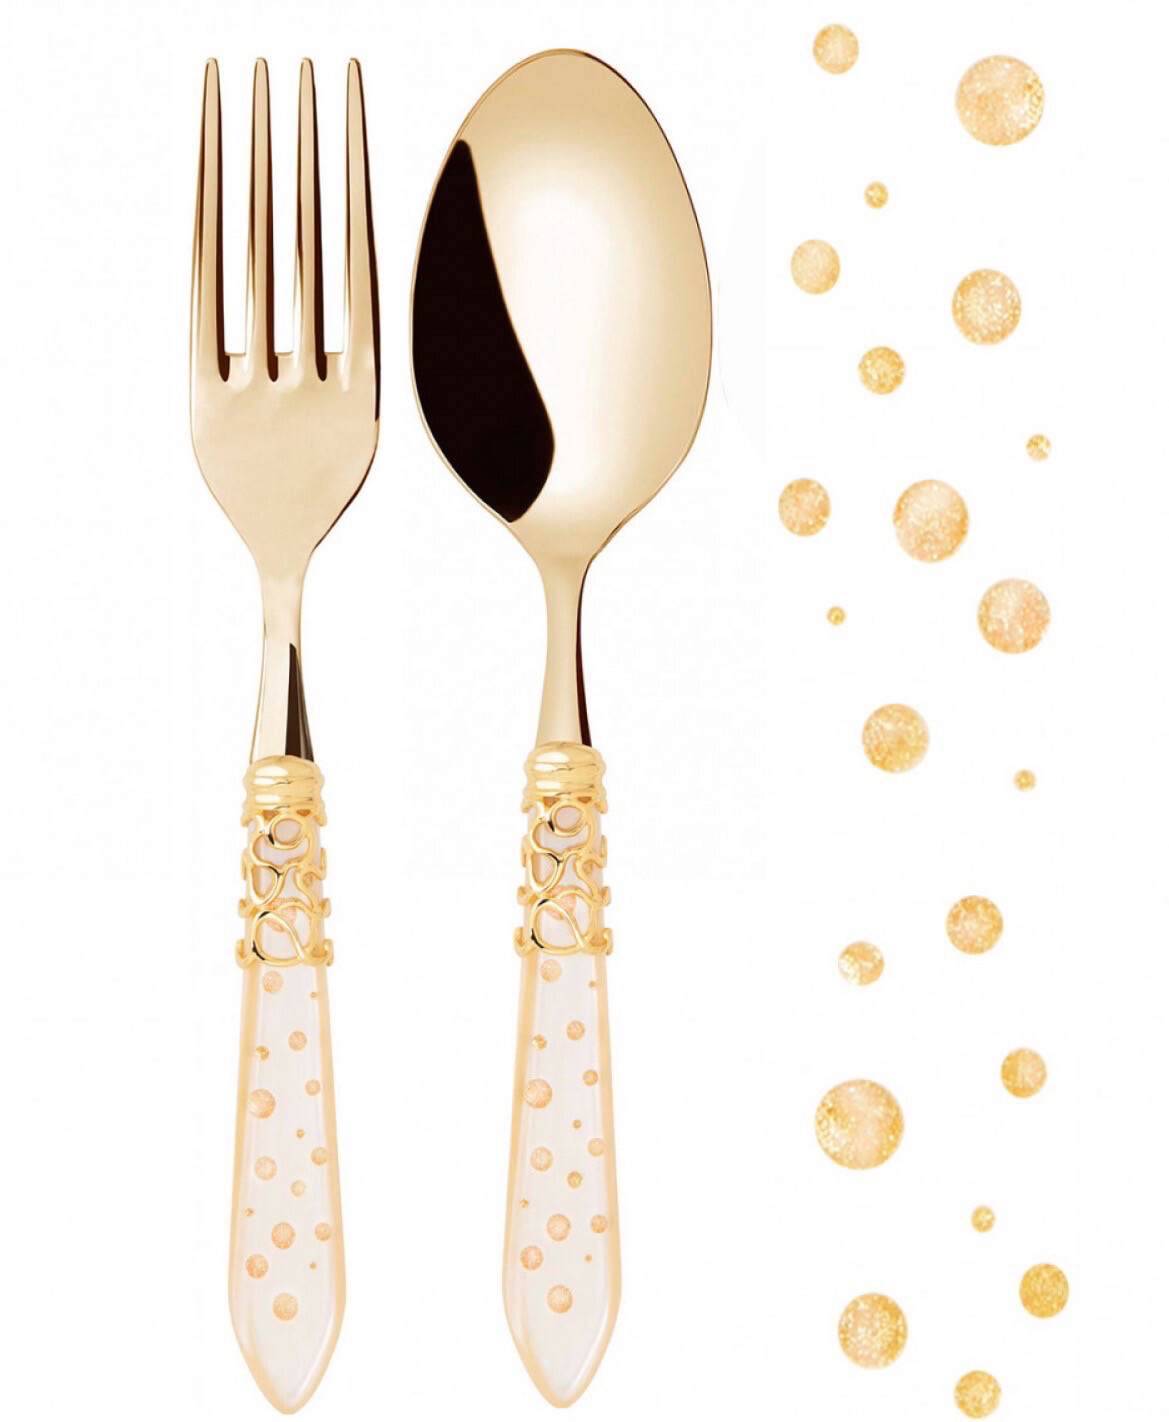 Melodia Galleria Gold PVD 2 Piece Serving Set ivory